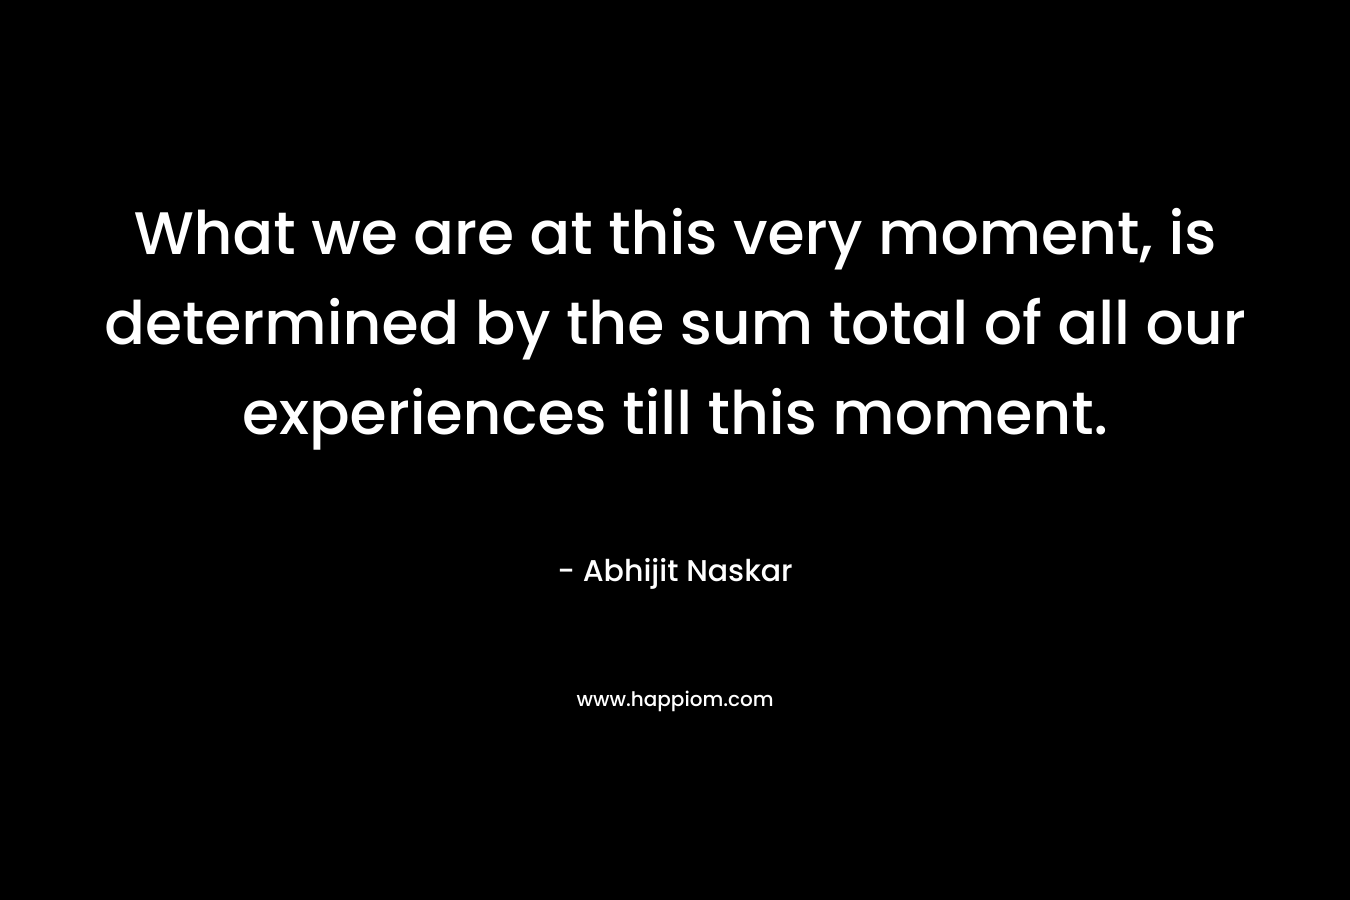 What we are at this very moment, is determined by the sum total of all our experiences till this moment.